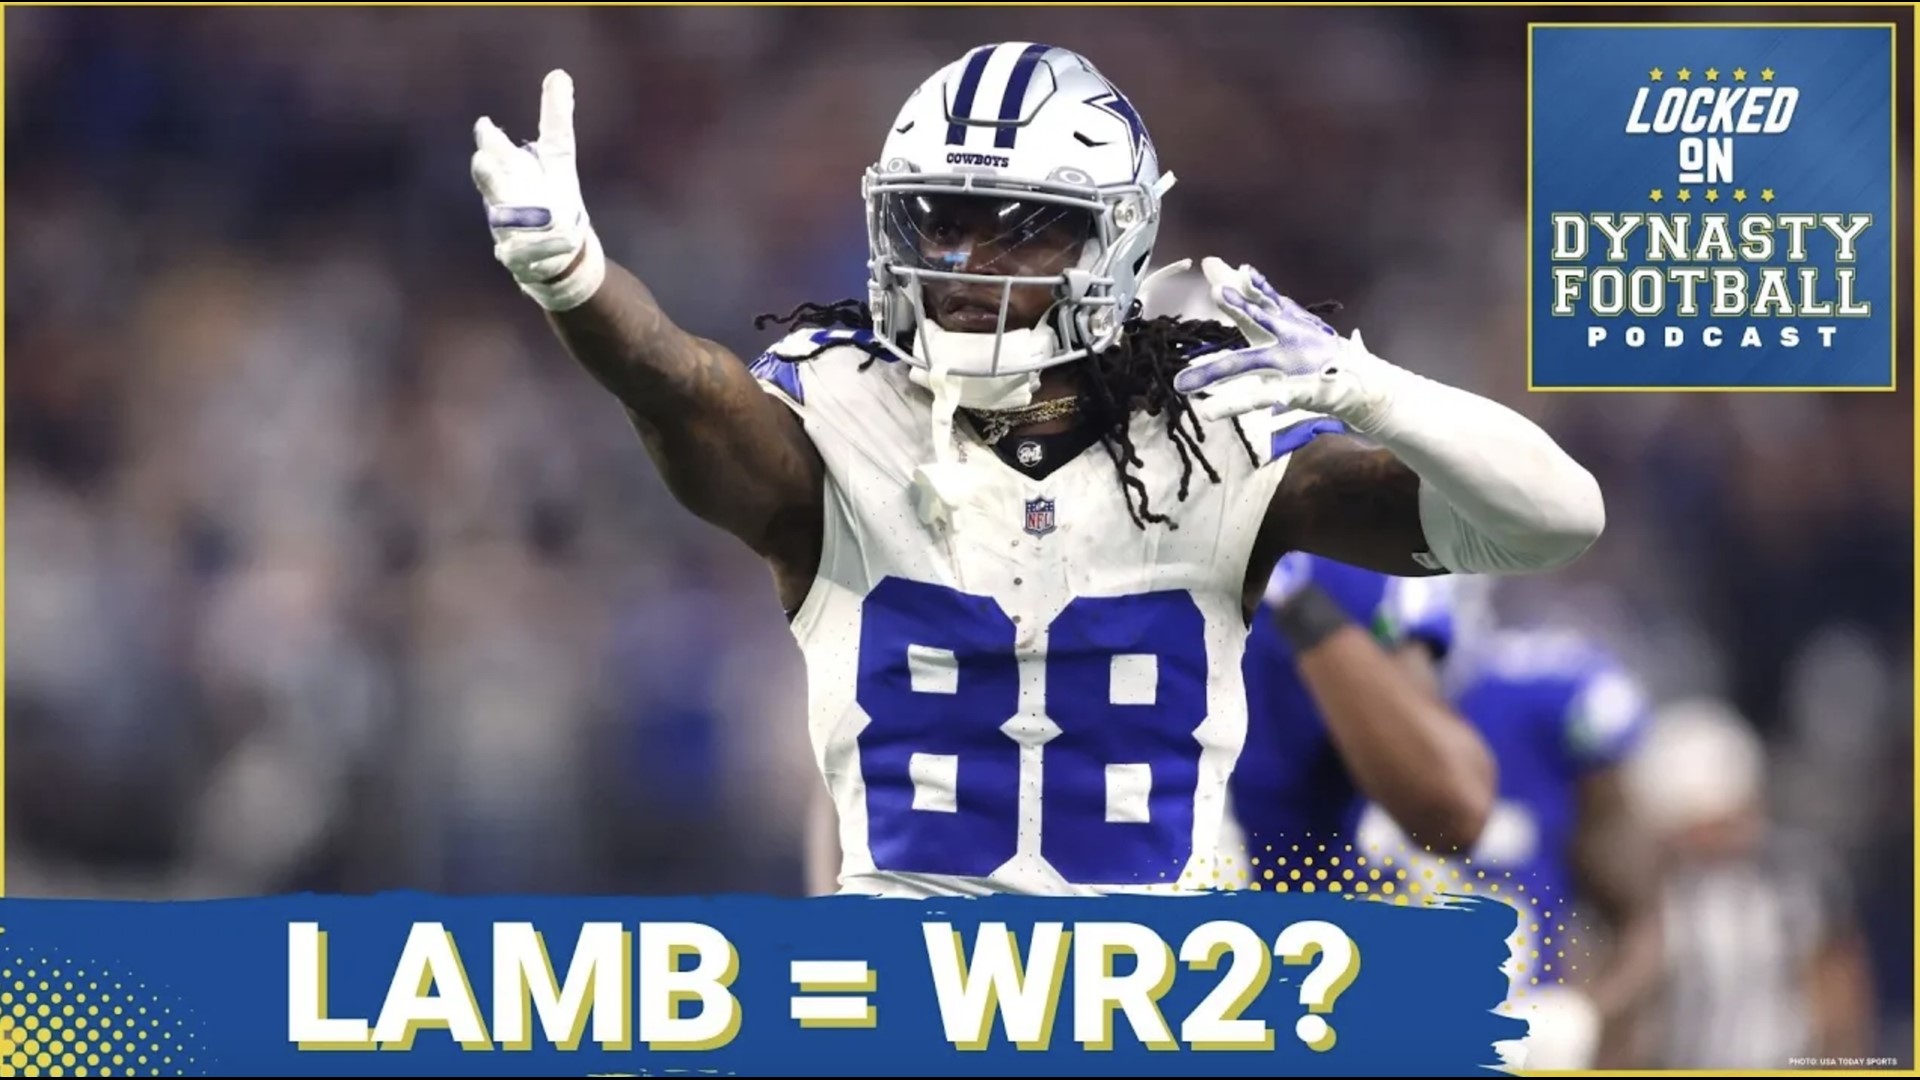 Dallas Cowboys WR CeeDee Lamb had a huge performance against the Seahawks in Week 13 of the NFL season. Is he the clear-cut WR2 in dynasty now?